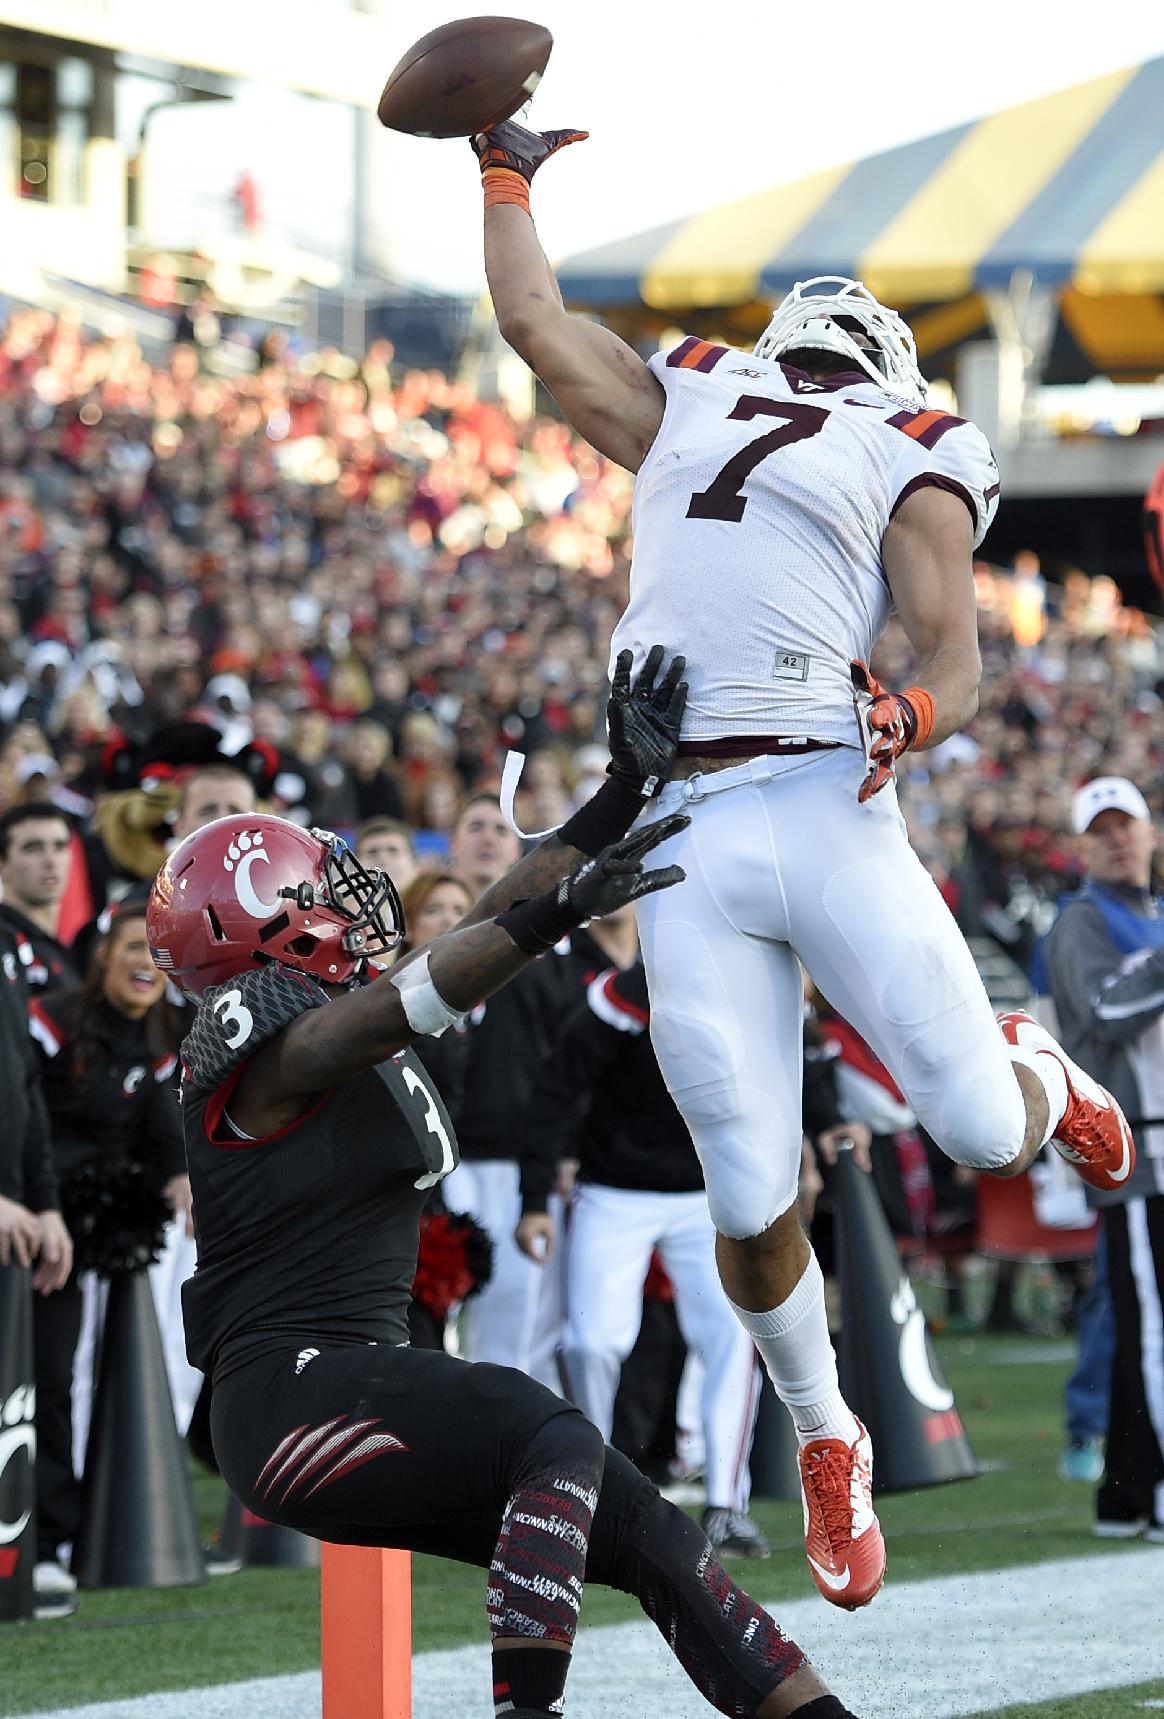 Virginia Tech tight end Bucky Hodges (7) reaches for the ball against Cincinnati defensive back Howard Wilder (3) during the second half of the Military Bowl NCAA college football game, Saturday, Dec. 27, 2014, in Annapolis, Md. The pass was incomplete. Virginia Tech won 33-17. (AP Photo/Nick Wass)